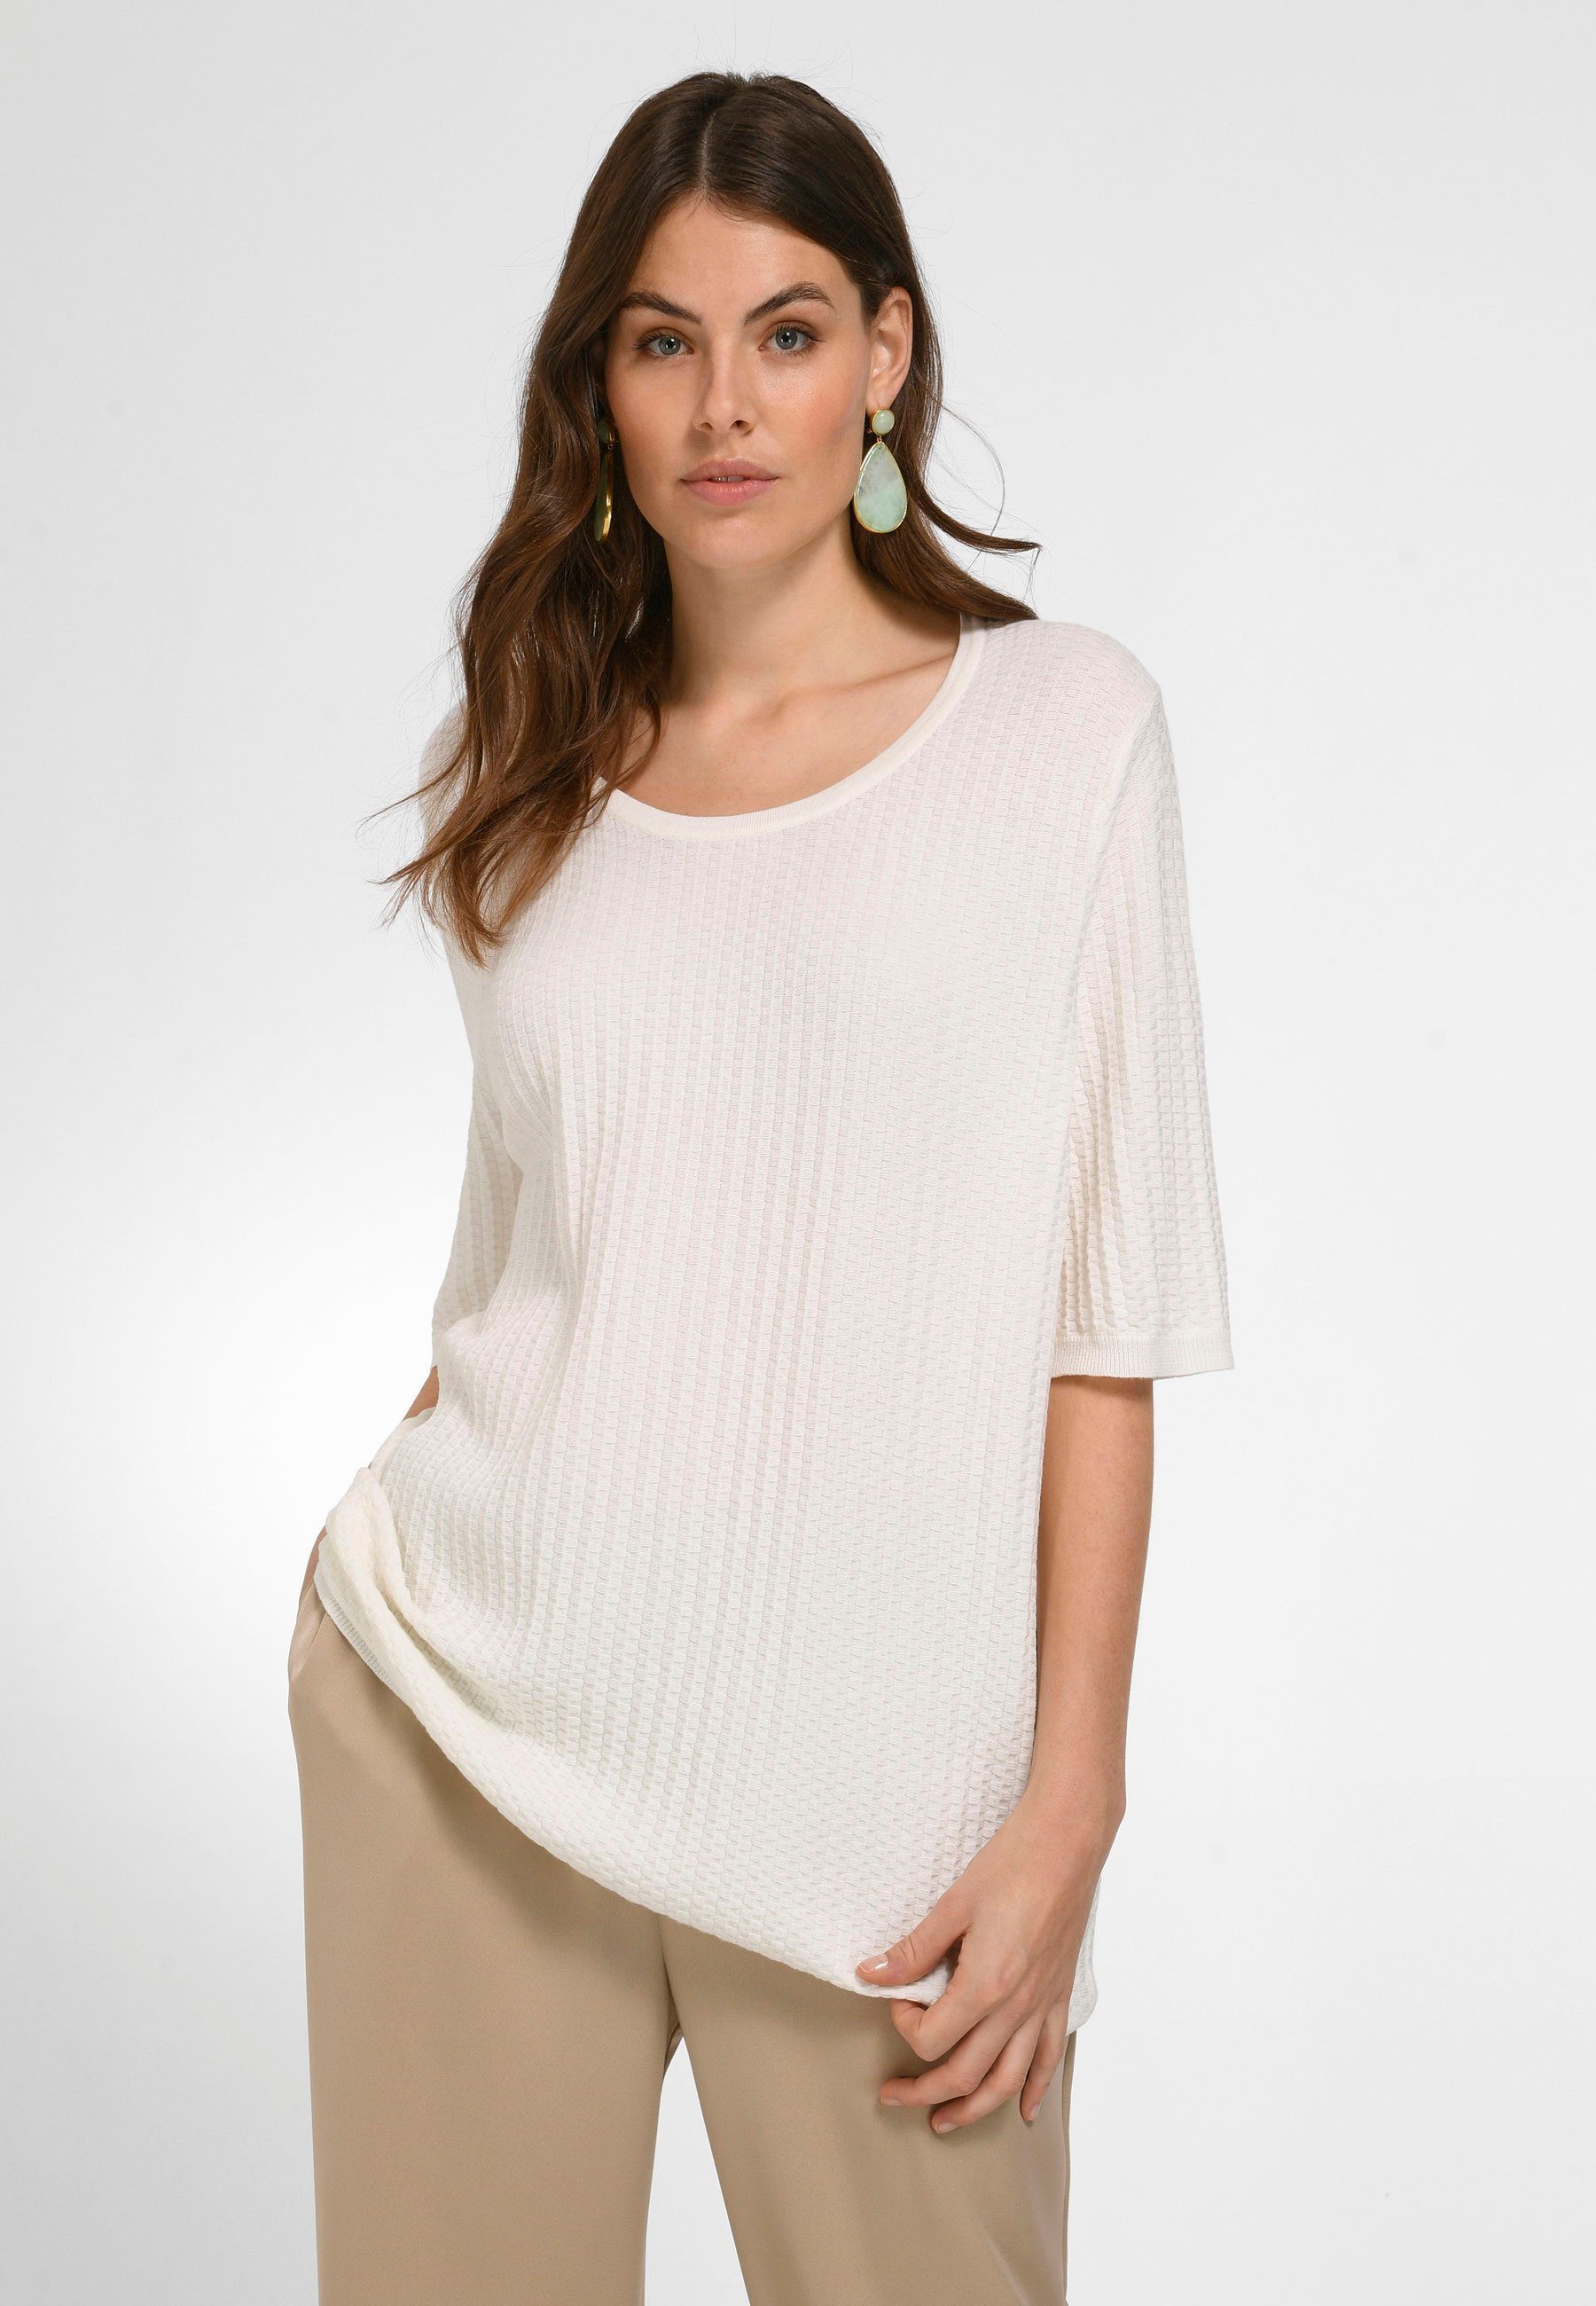 Emilia Lay Strickpullover Pullover weiss